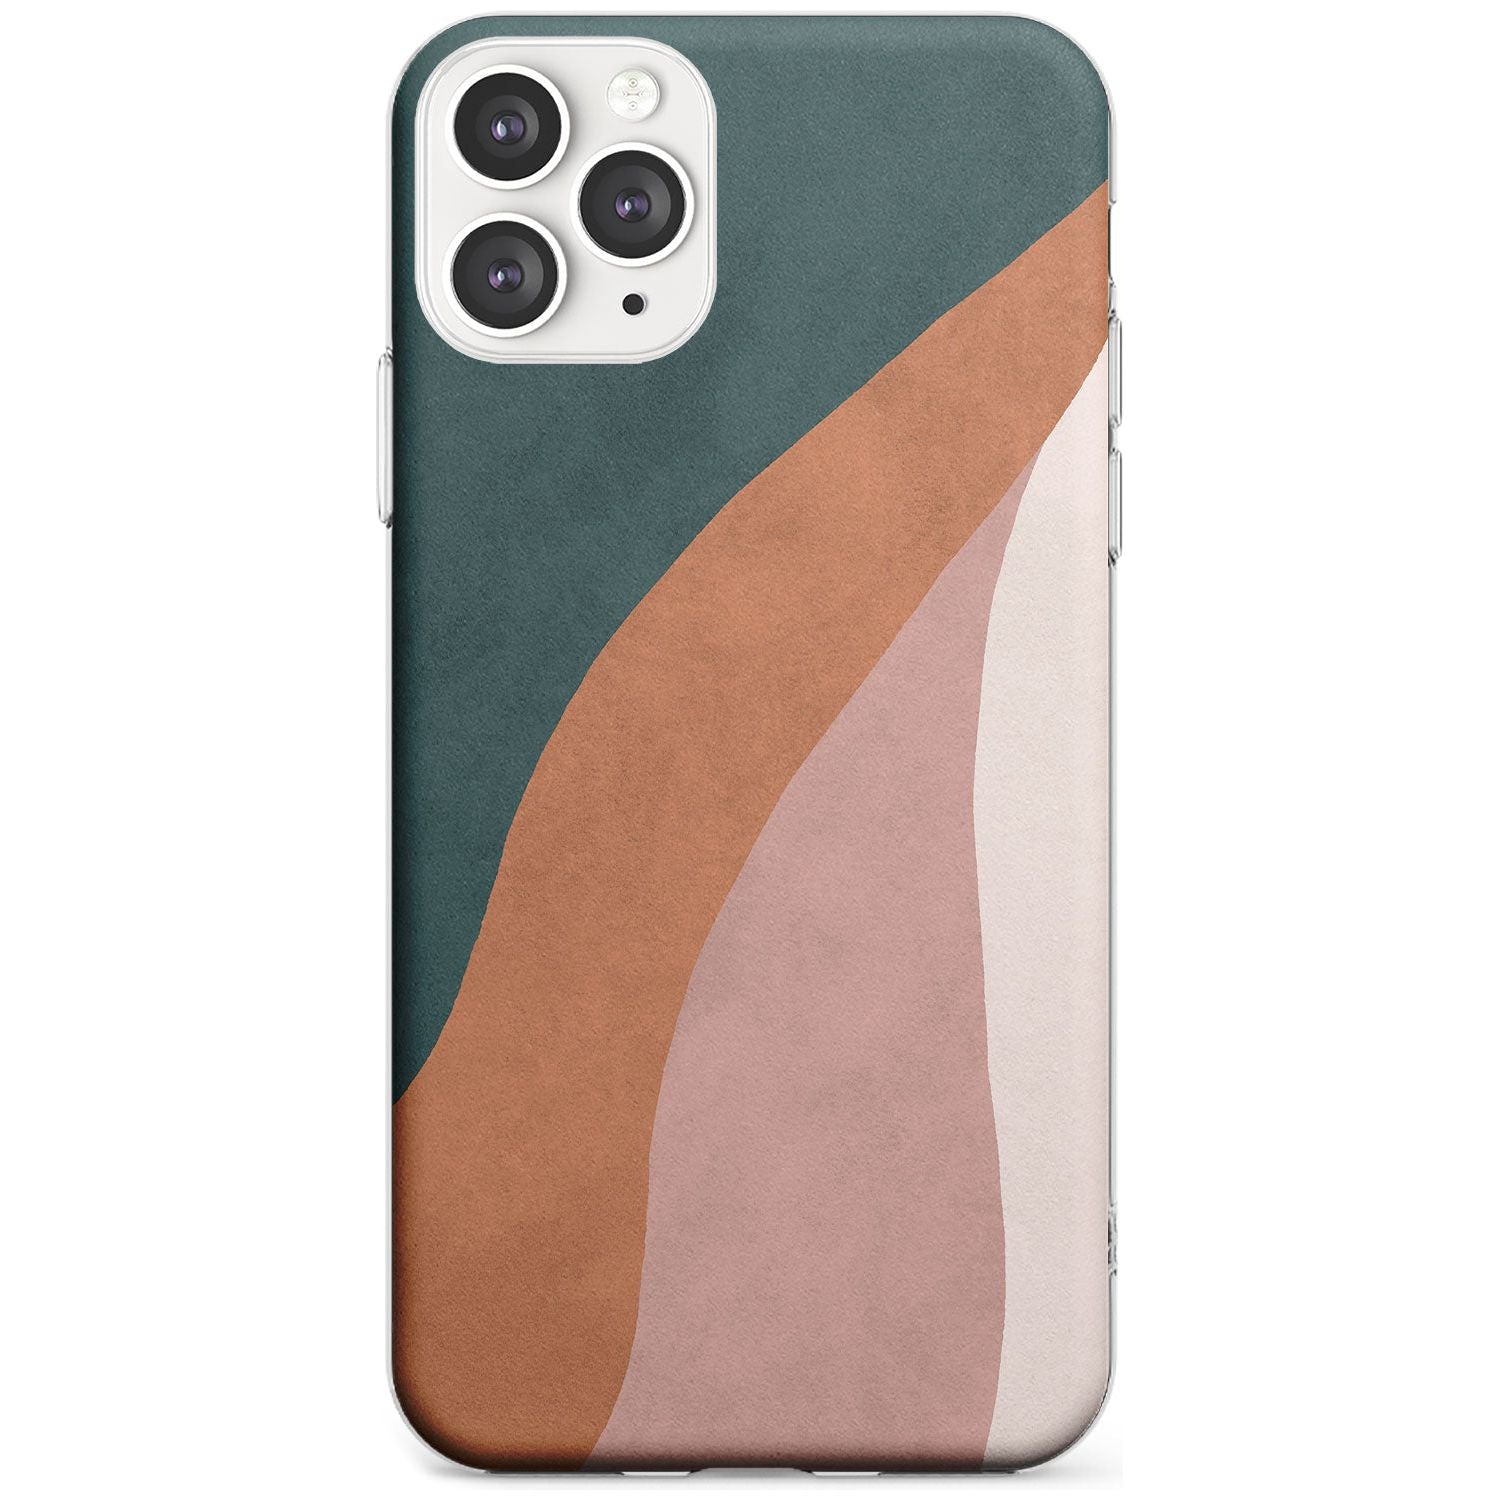 Lush Abstract Watercolour: Design #7 Slim TPU Phone Case for iPhone 11 Pro Max